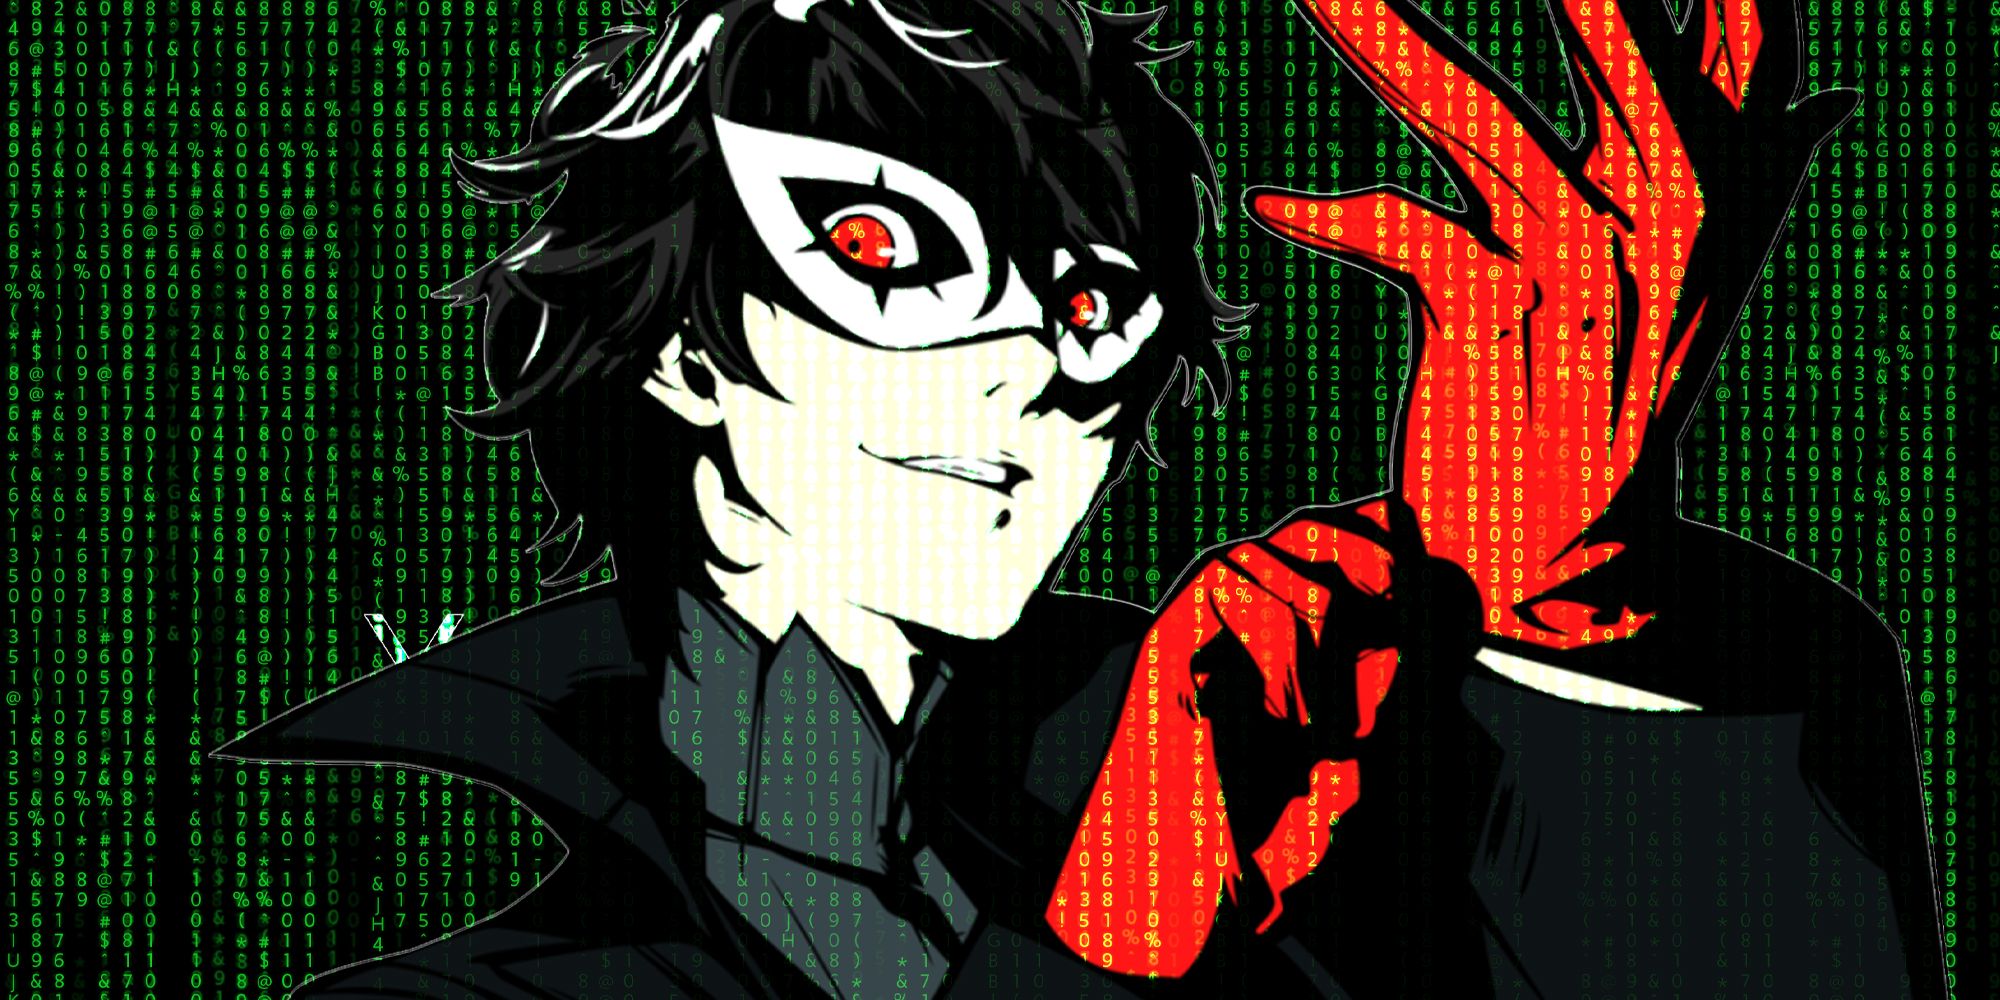 Persona Producer Says AI Art Could Be “Very Useful”